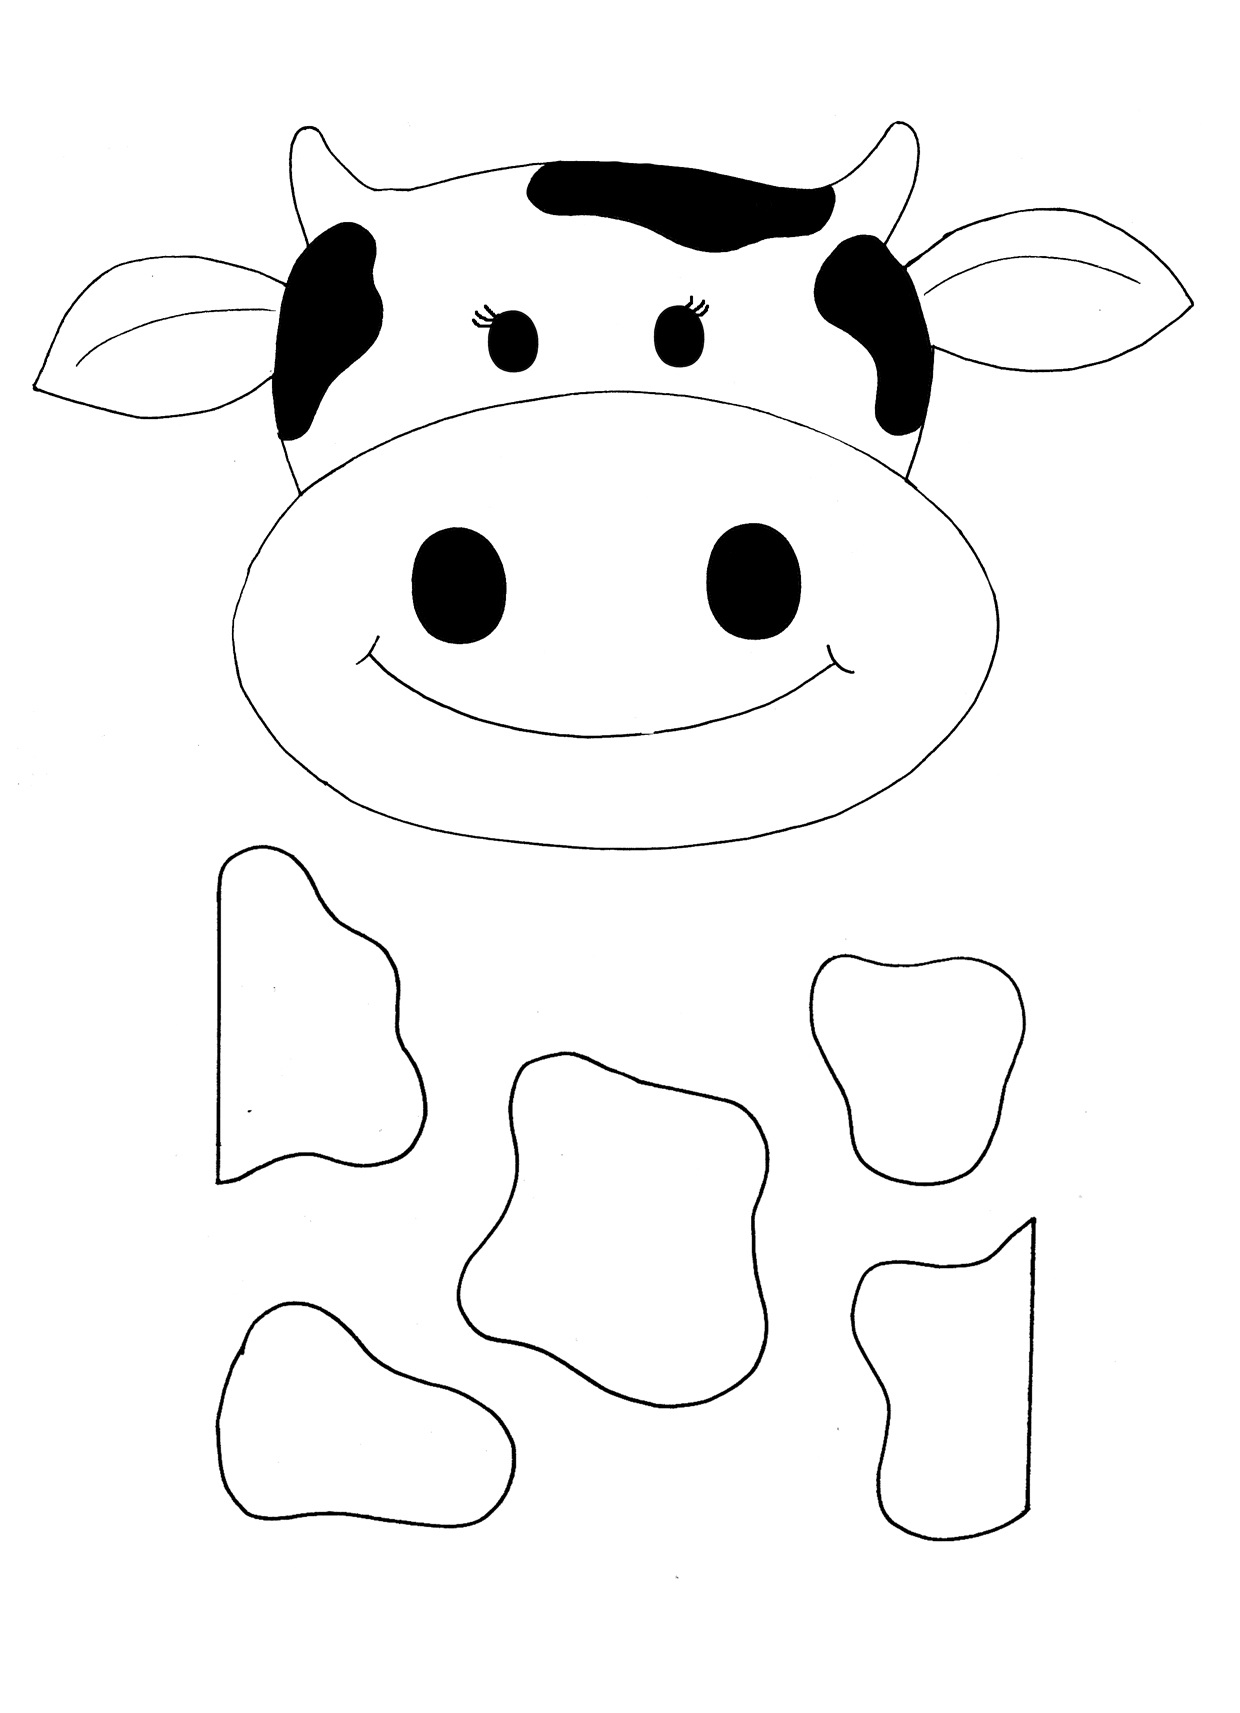 1000+ images about Cow | Notebooks, Farm quilt and ...